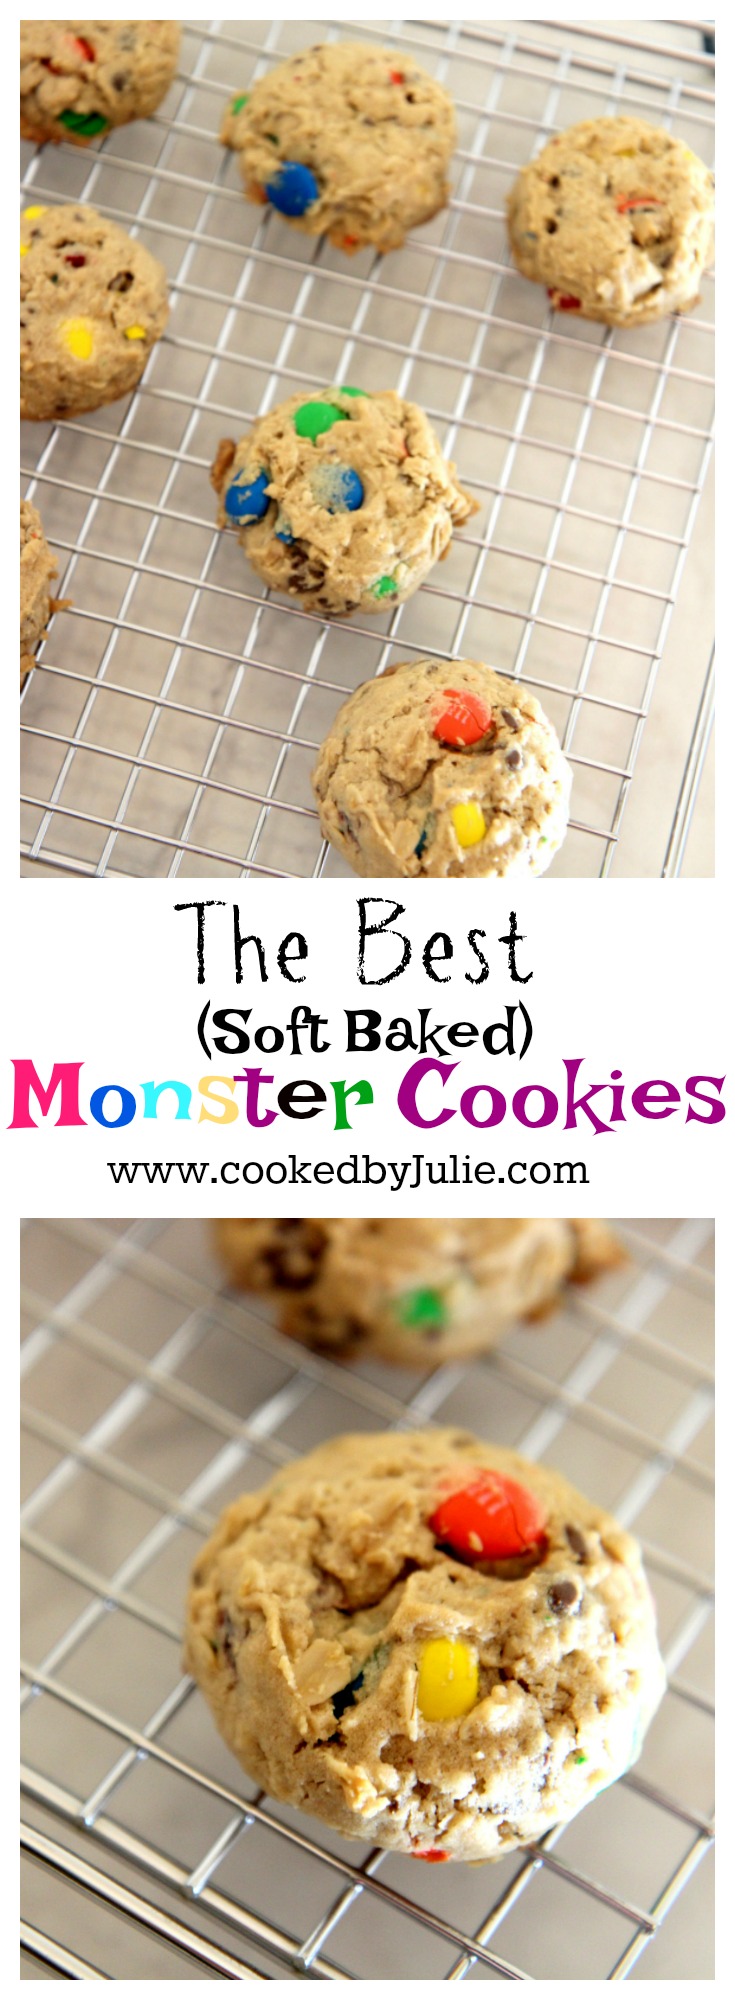 The Best Soft Baked Monster Cookie Recipe from Cooked By Julie